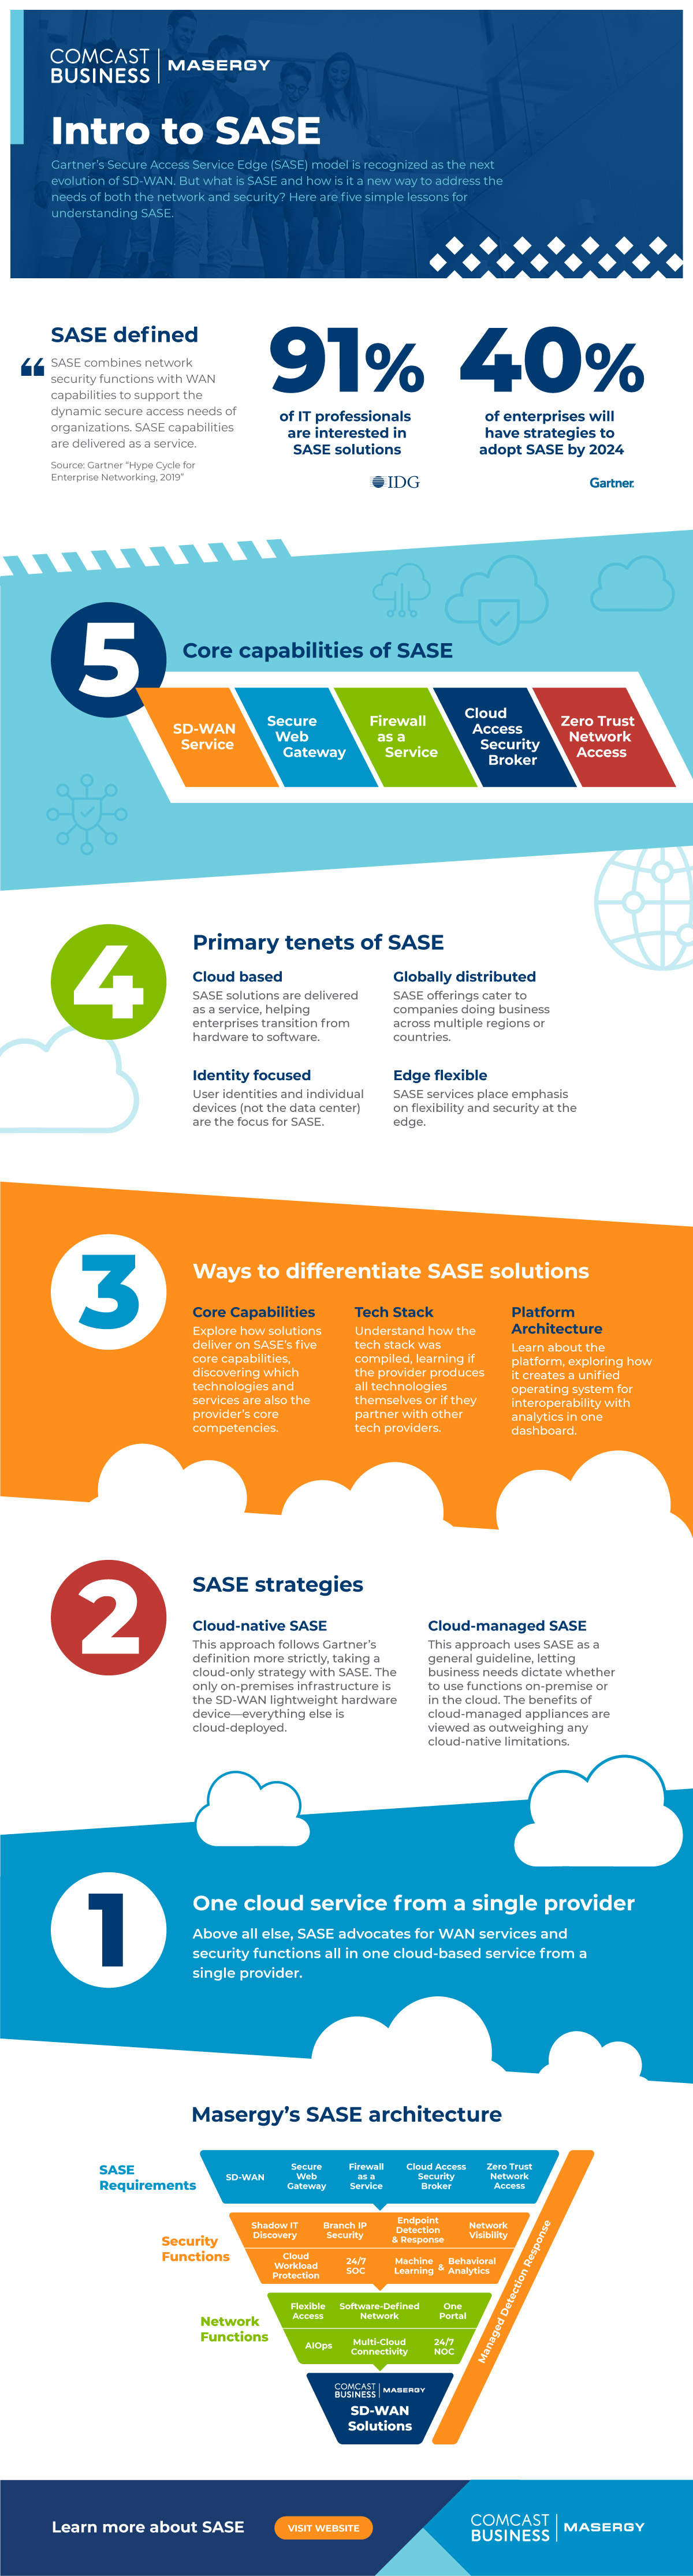 Introduction to SASE Infographic